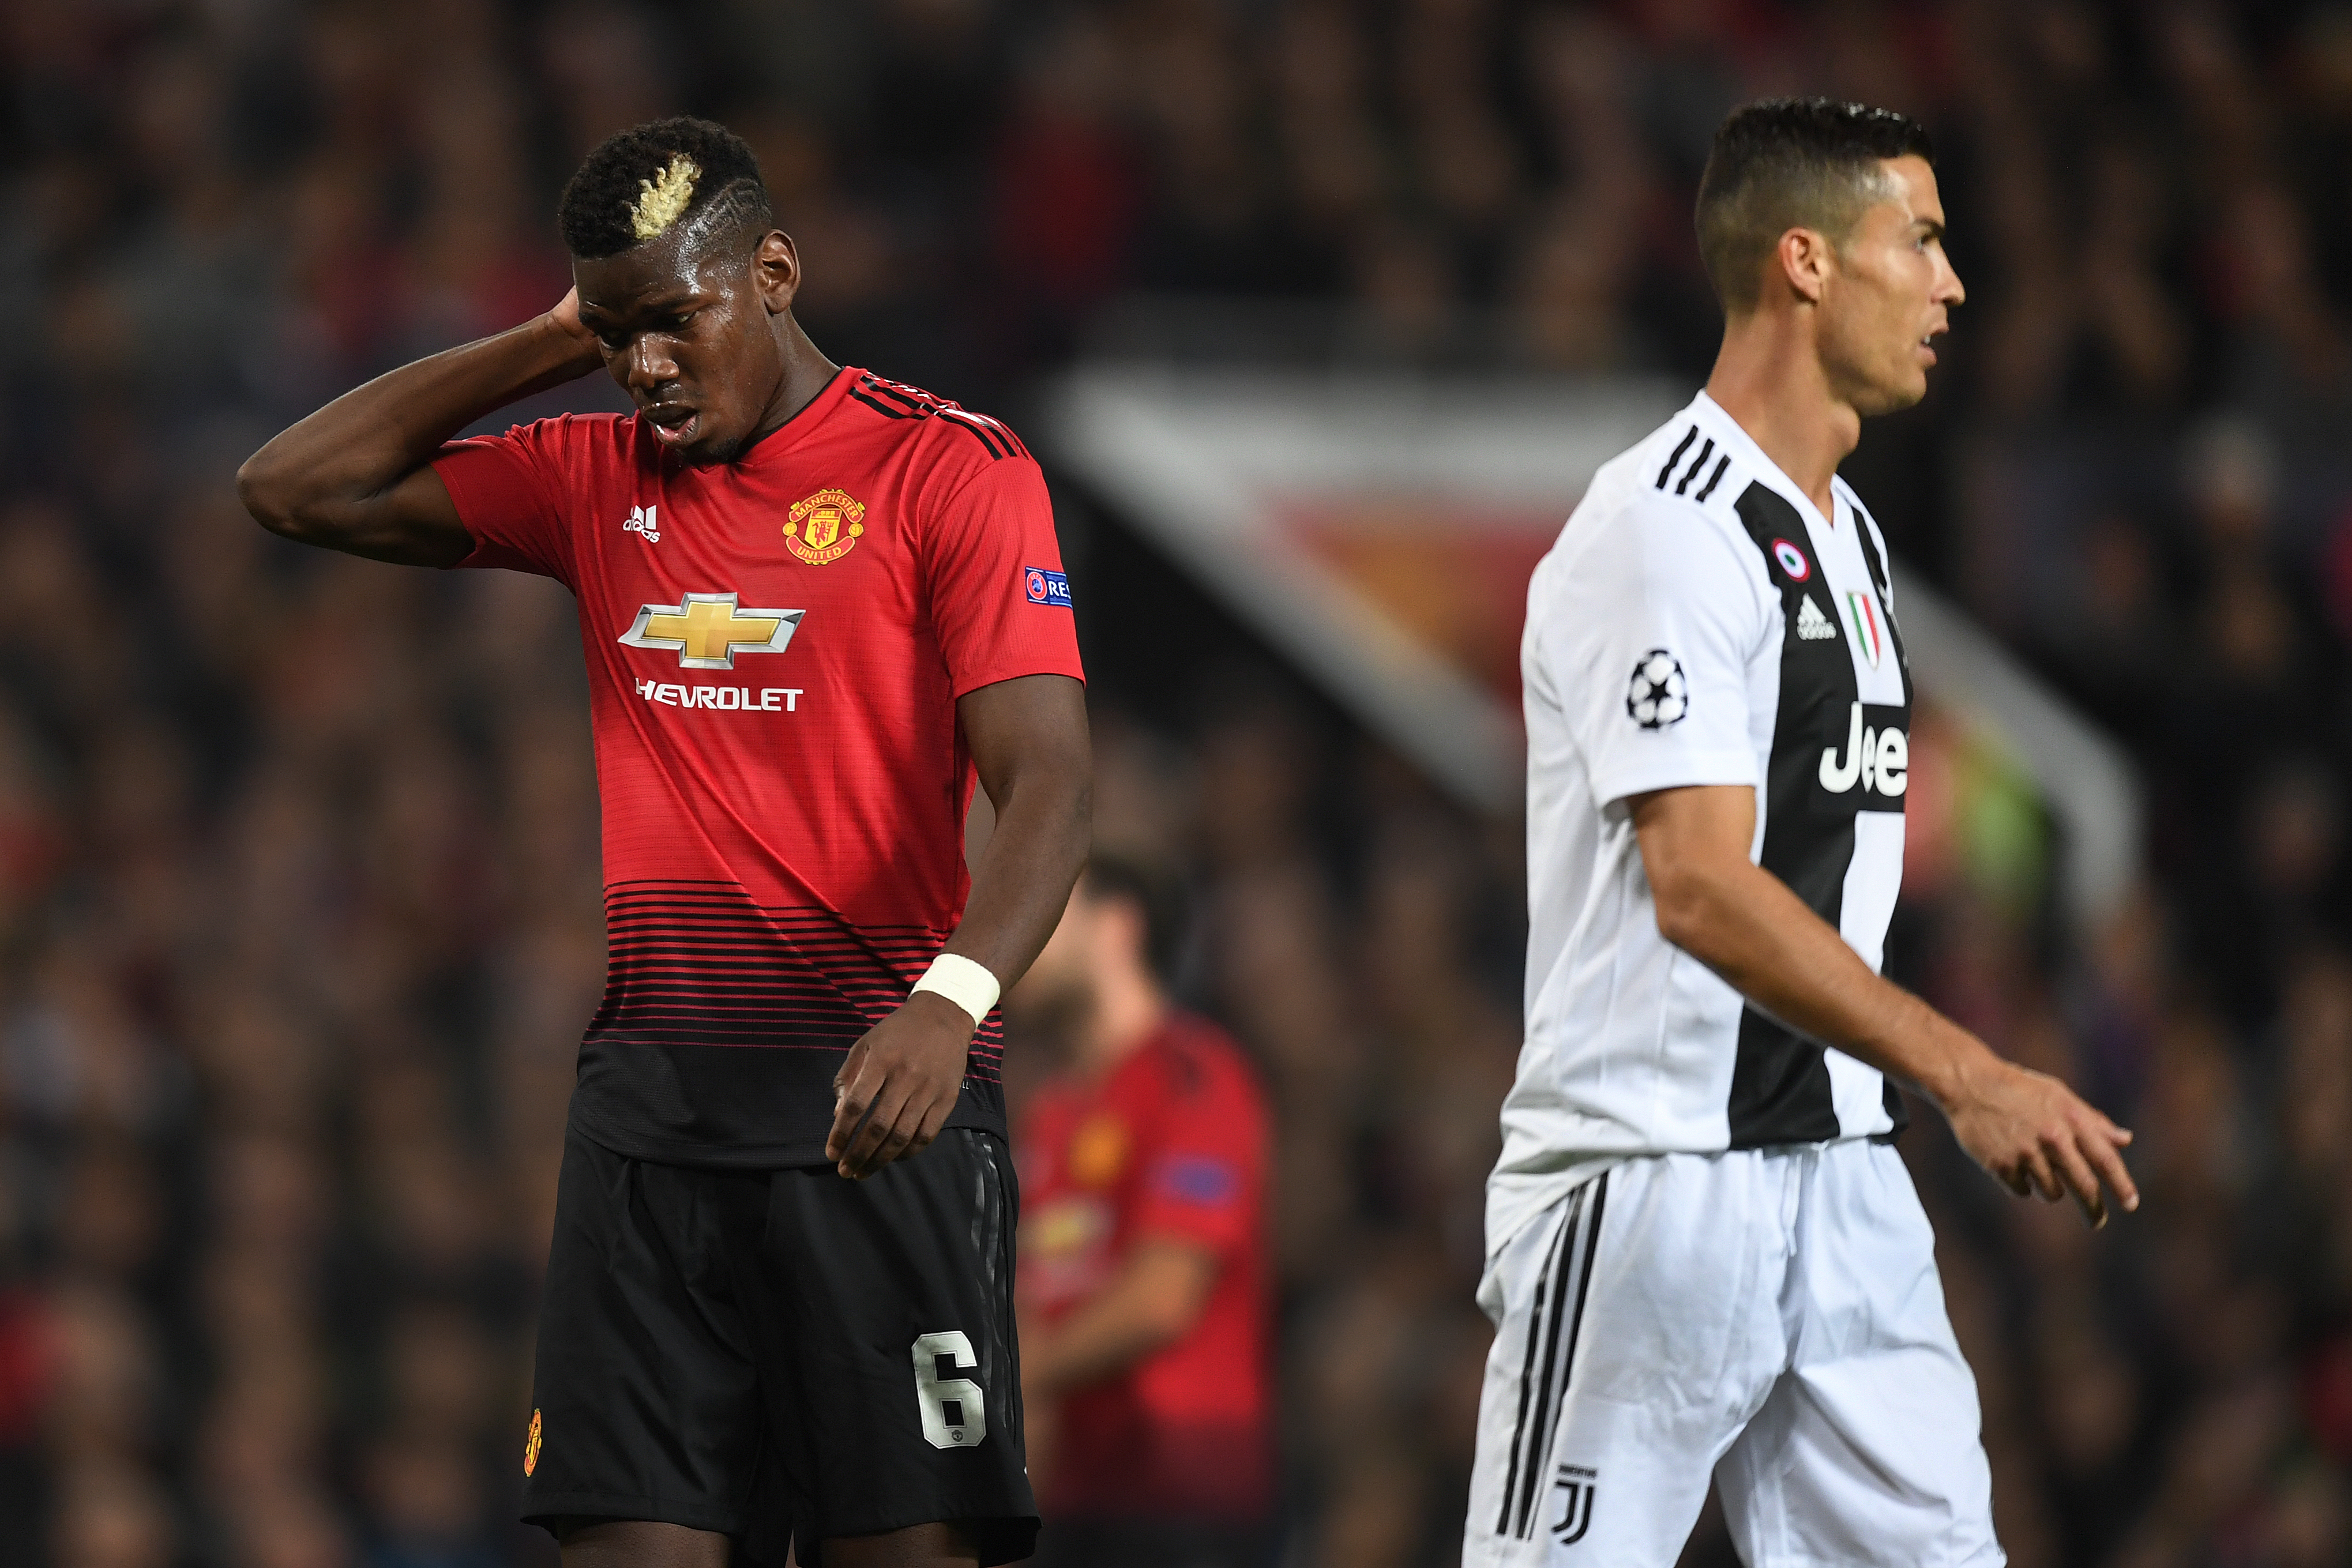 MANCHESTER, ENGLAND - OCTOBER 23:  Paul Pogba of Manchester United looks dejected as Cristiano Ronaldo of Juventus looks on during the Group H match of the UEFA Champions League between Manchester United and Juventus at Old Trafford on October 23, 2018 in Manchester, United Kingdom.  (Photo by Michael Regan/Getty Images)